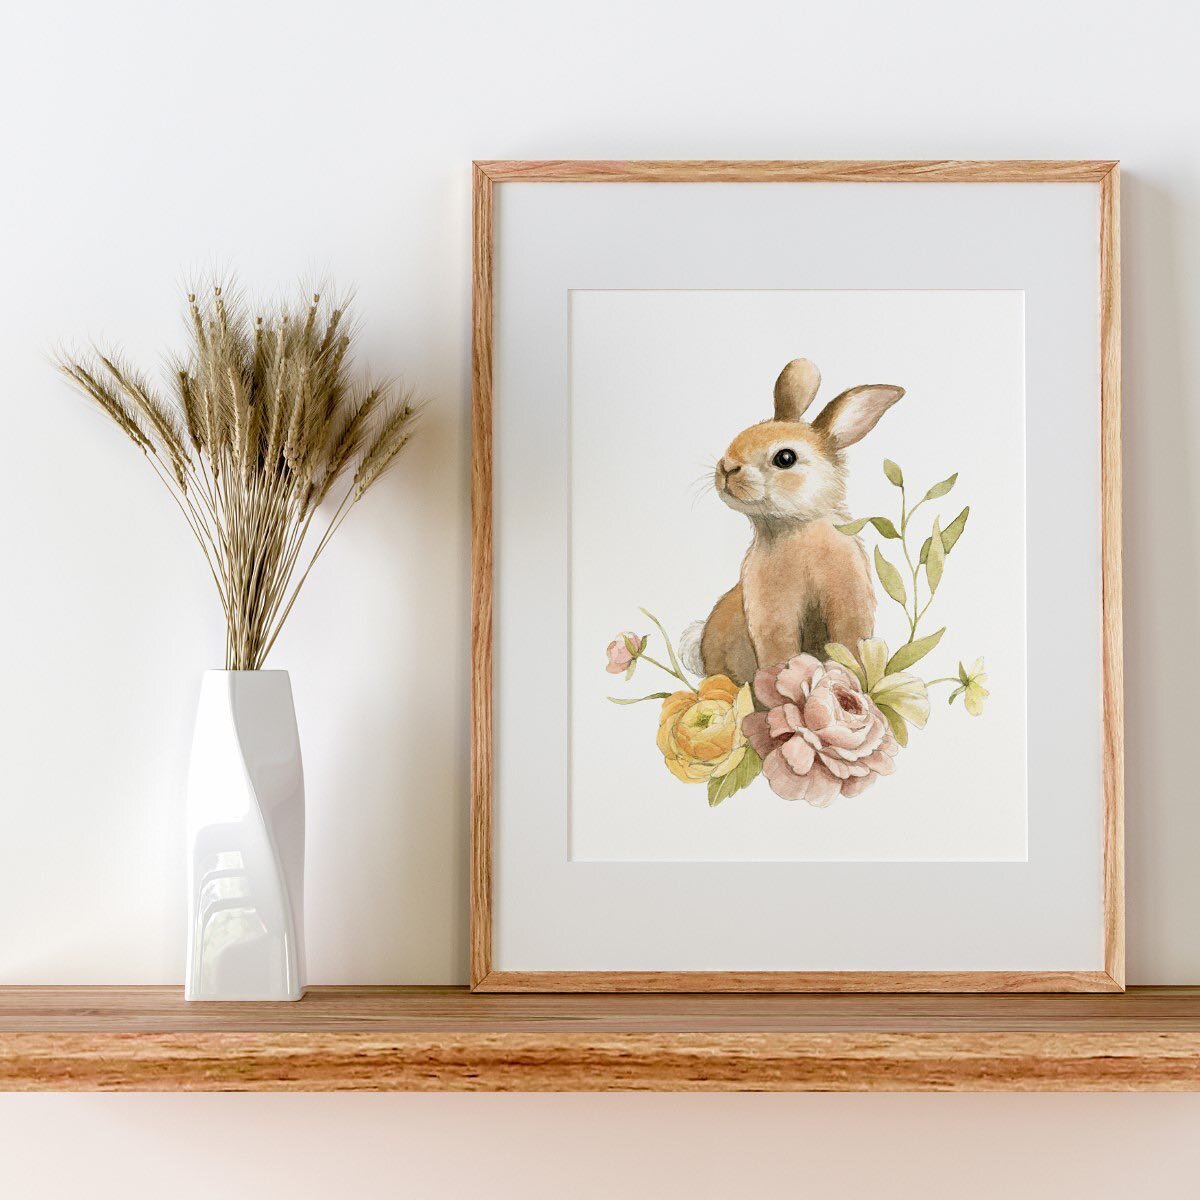 I find it a little funny that I&rsquo;ve painted over 4 bunnies&hellip; and I&rsquo;m allergic to them! But they&rsquo;re so cute :) 

Happy Thursday!&hellip; or should I say, &ldquo;hoppy&rdquo; Thursday? Nah ;)